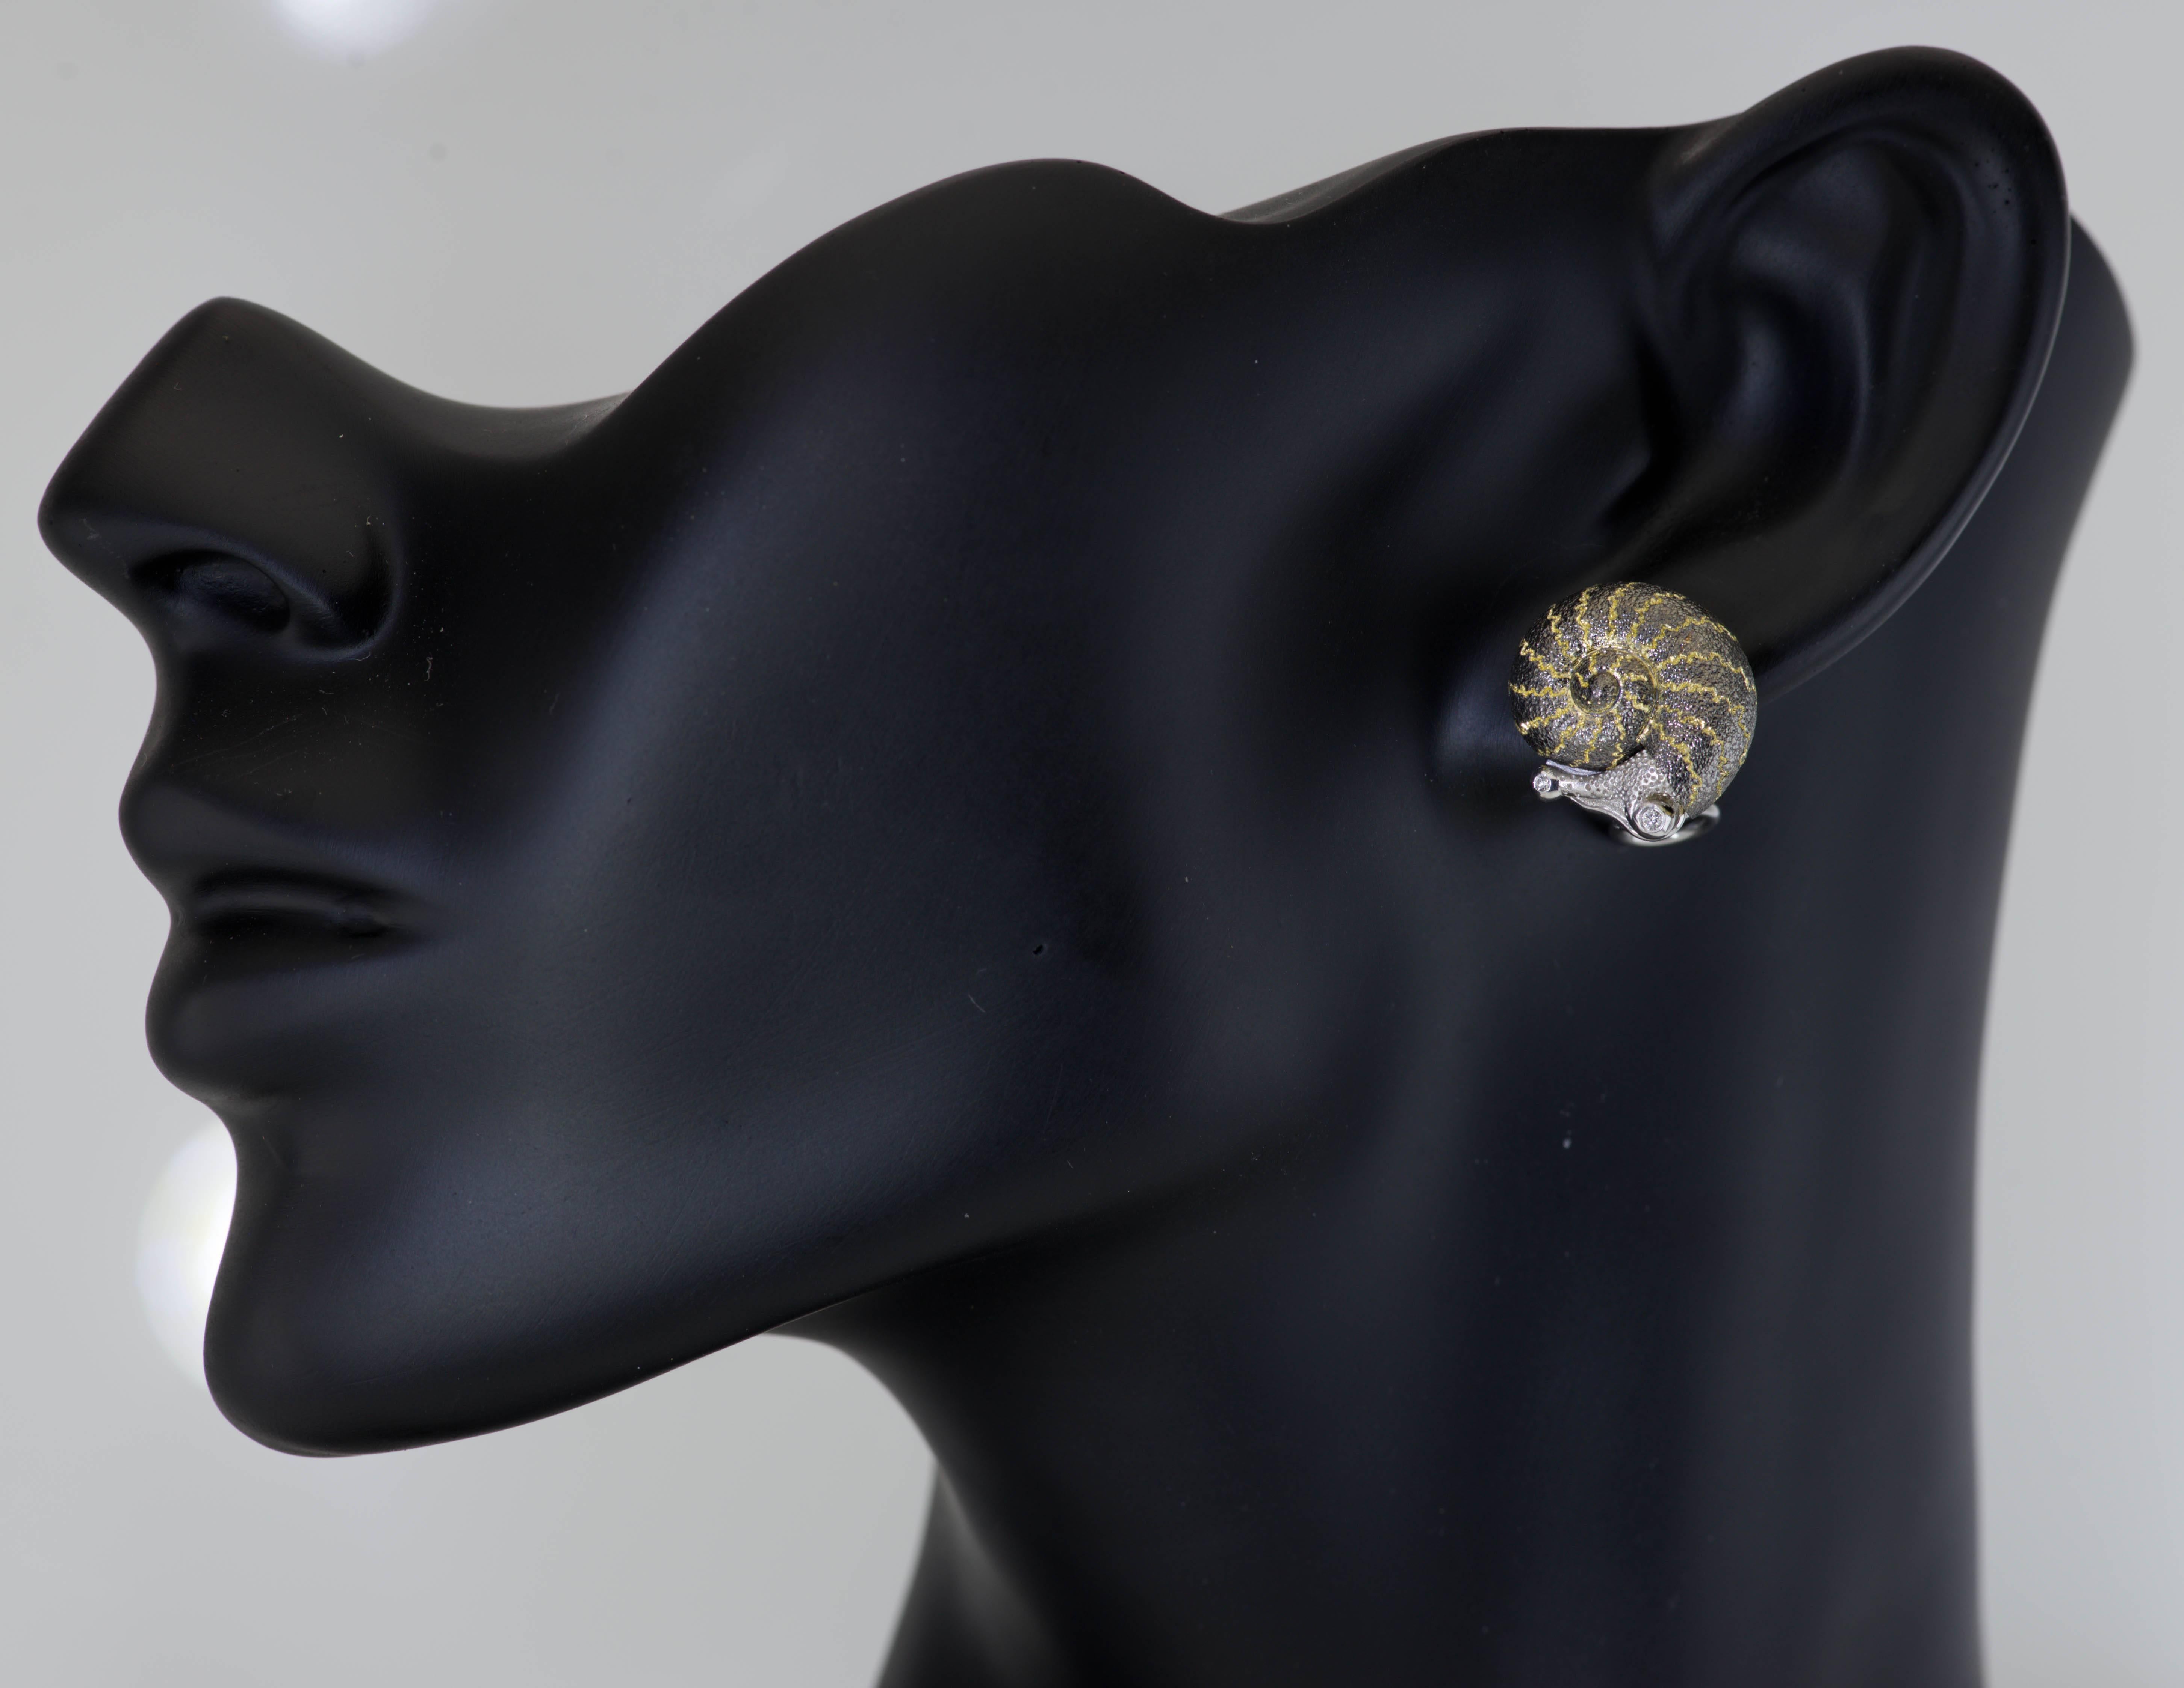 Women's Signature Gold Snail Earrings w Diamonds & Signature Metalwork by Alex Soldier